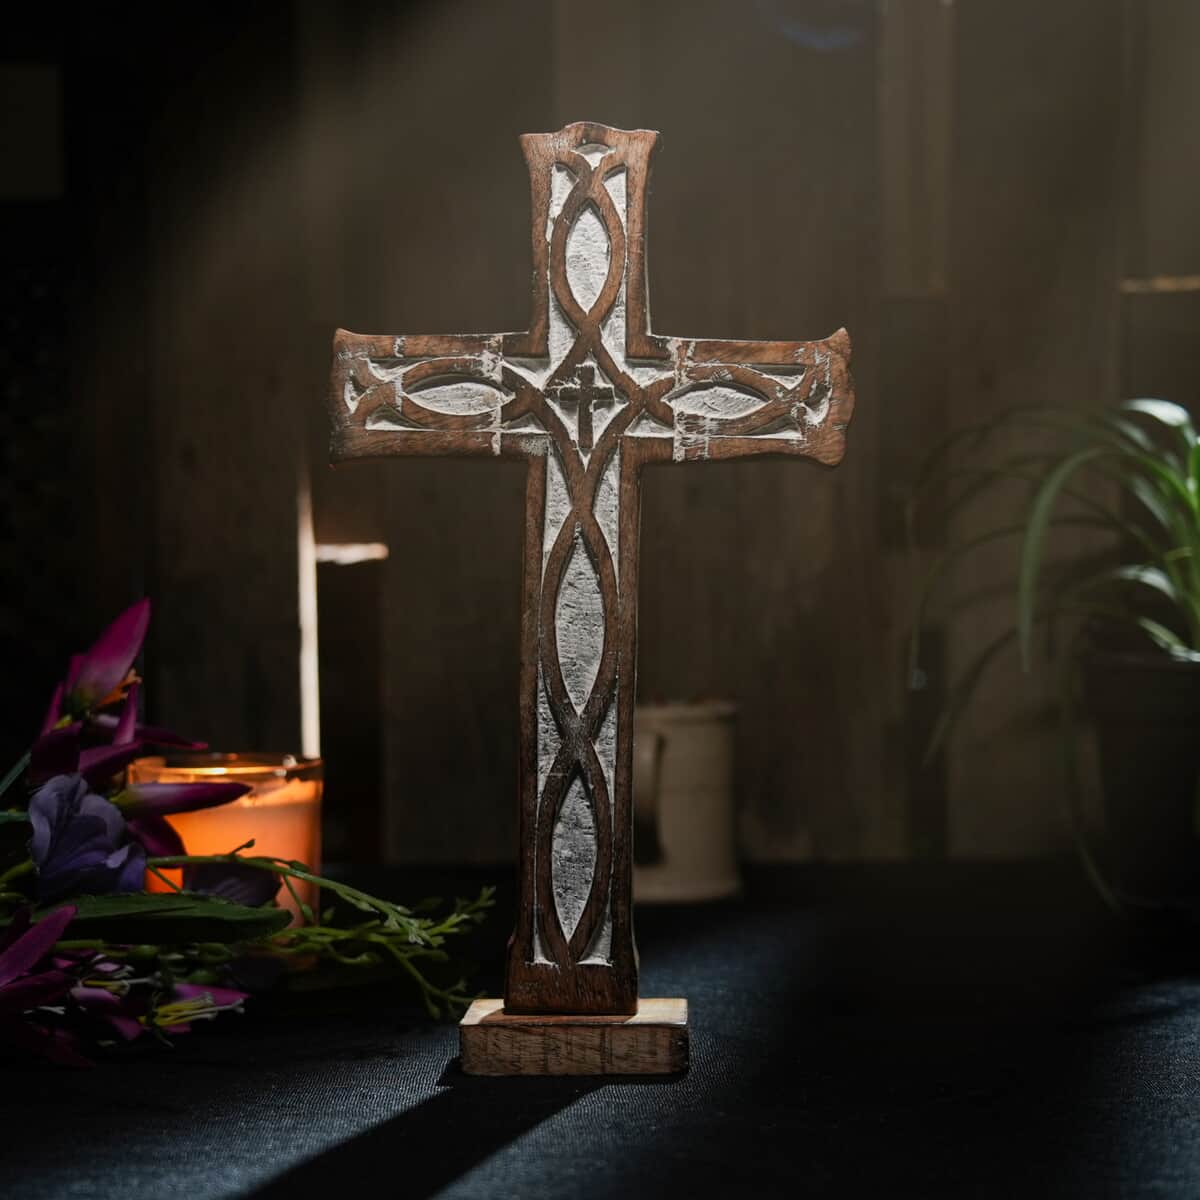 Nakkashi Brown Wooden Handcrafted Decorative Cross (7x12), Vintage Style Wall Hanging Handcarved Mango Wood Cross For Home Decor image number 1